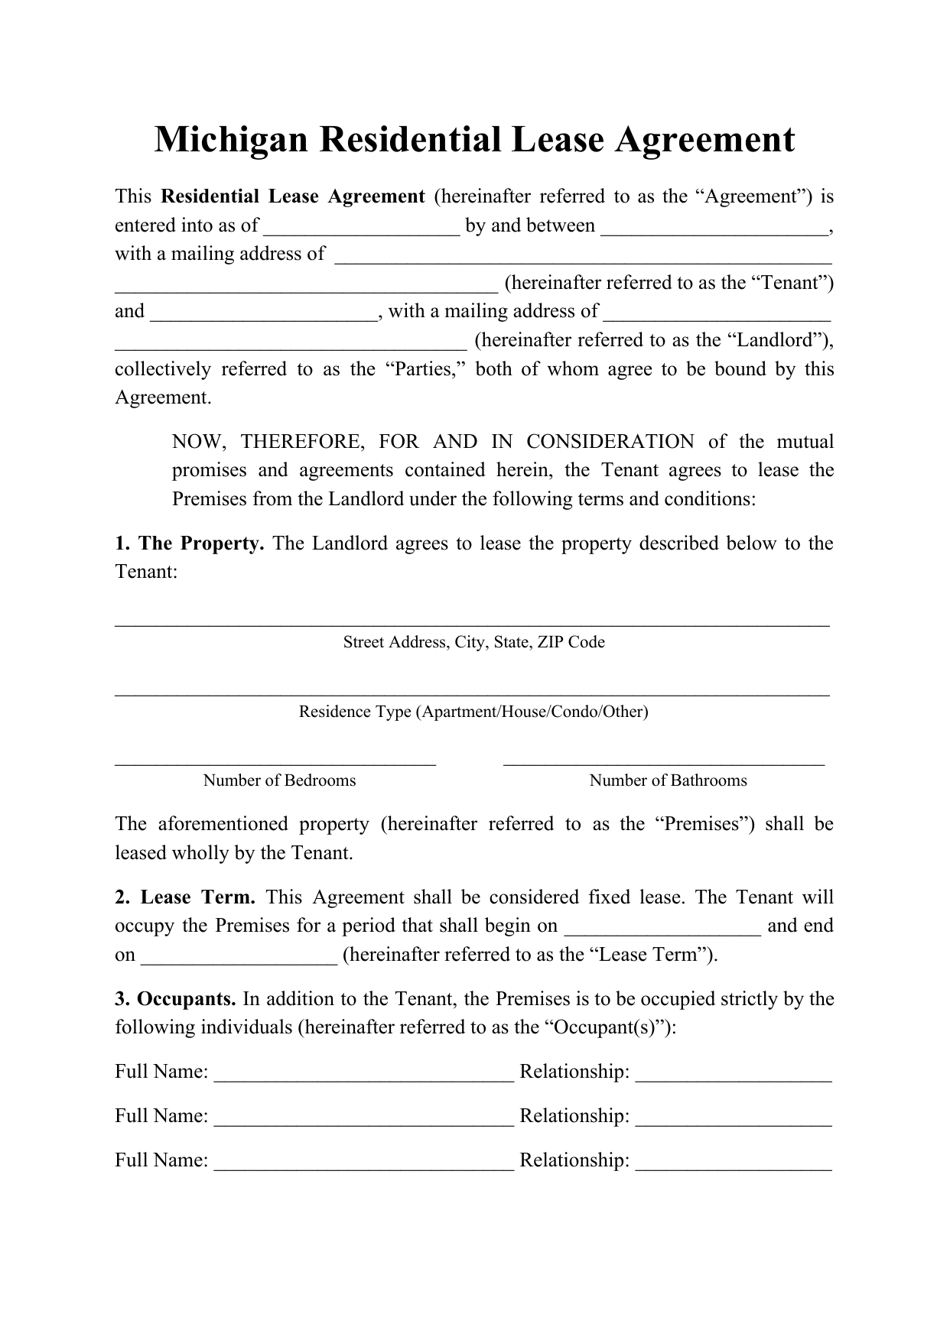 michigan residential lease agreement template download printable pdf templateroller